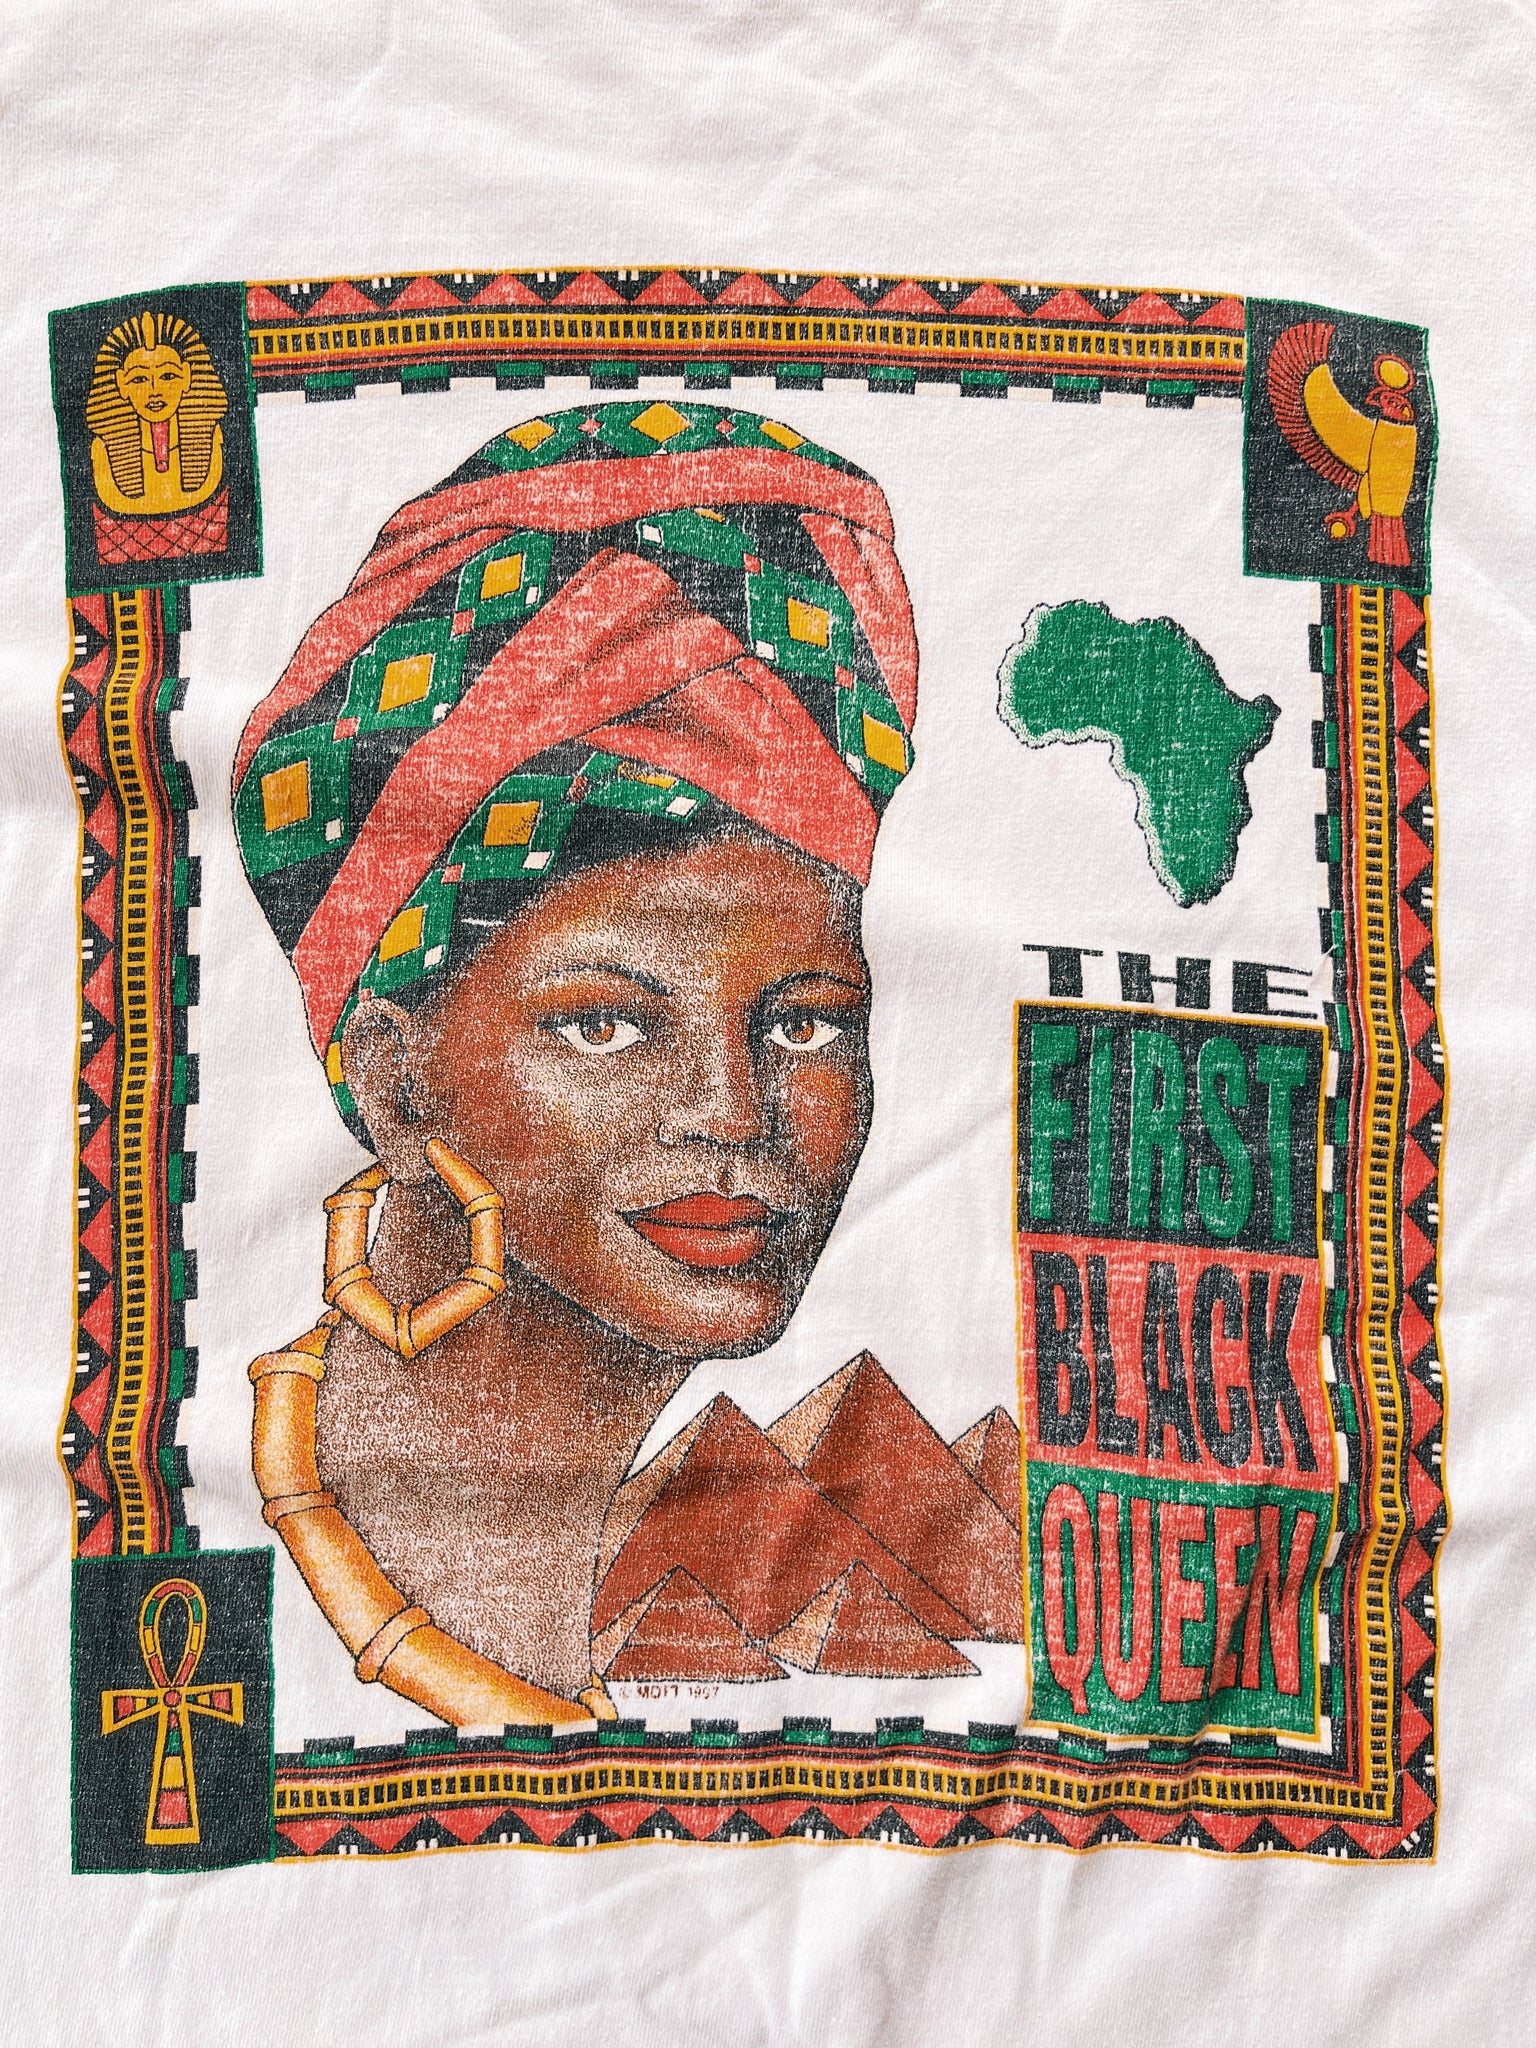 Vintage "The First Black Queen" T-Shirt (1993)